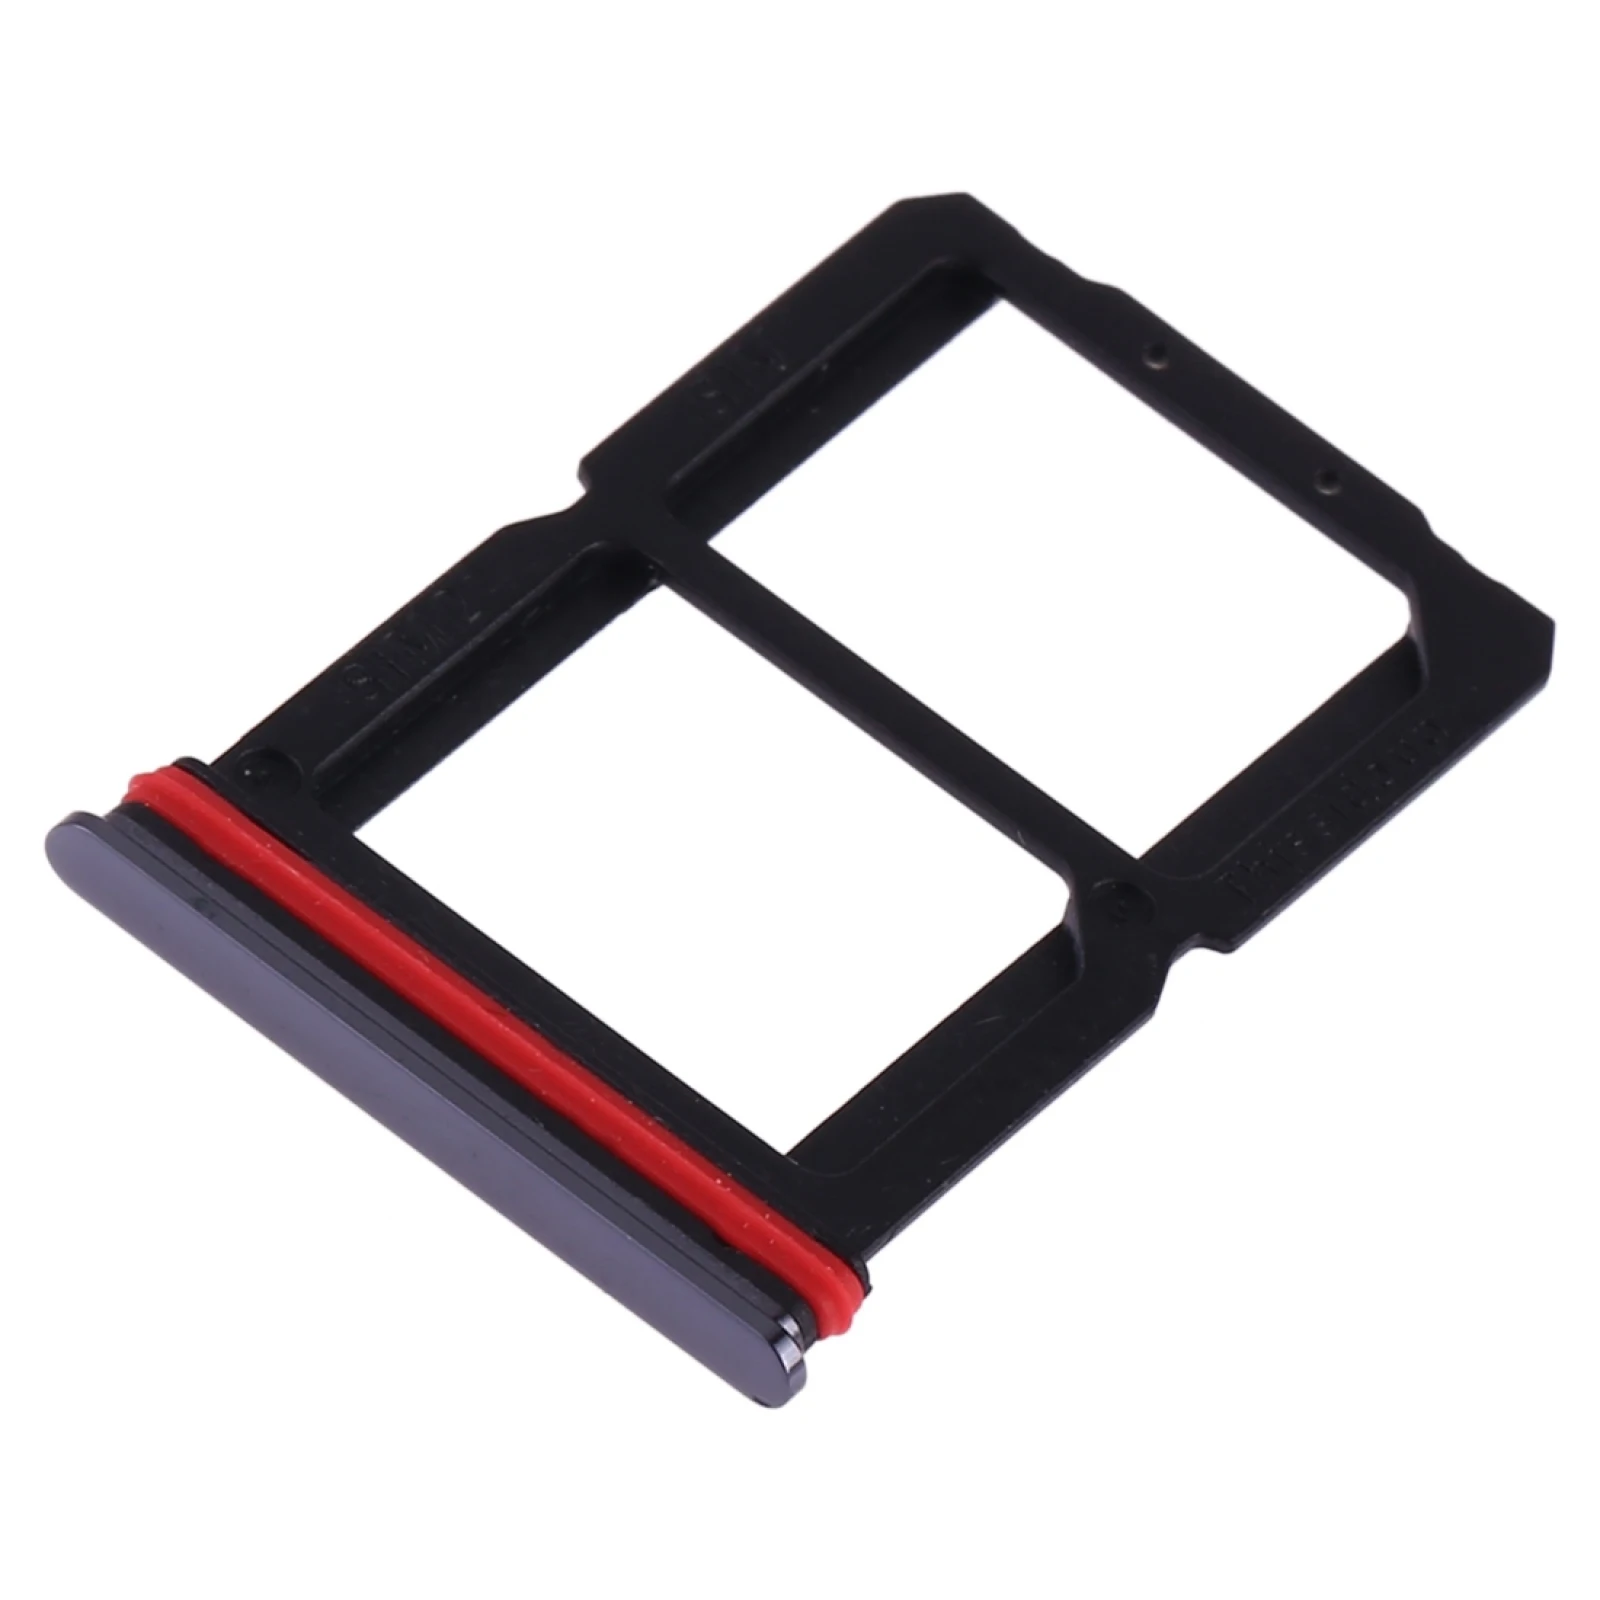 

nano Sim Card Micro SIM Card Reader Holder Sim Tray Adapter replacement for Oneplus 2 3 3T X 5 5T 6